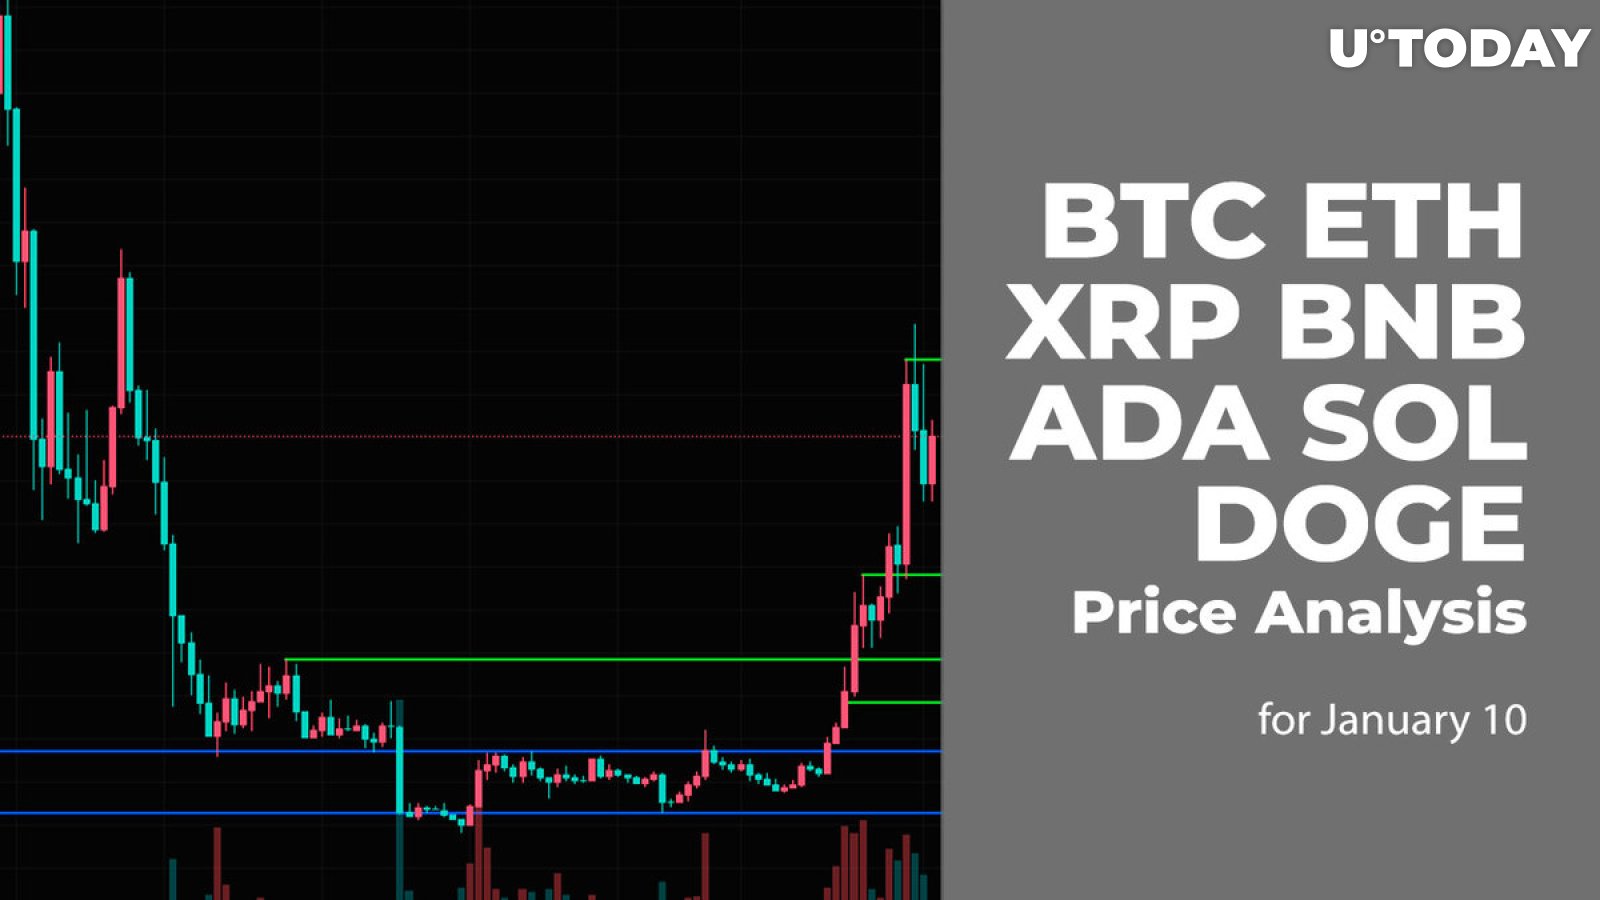 BTC, ETH, XRP, BNB, ADA, SOL and DOGE Price Analysis for January 10